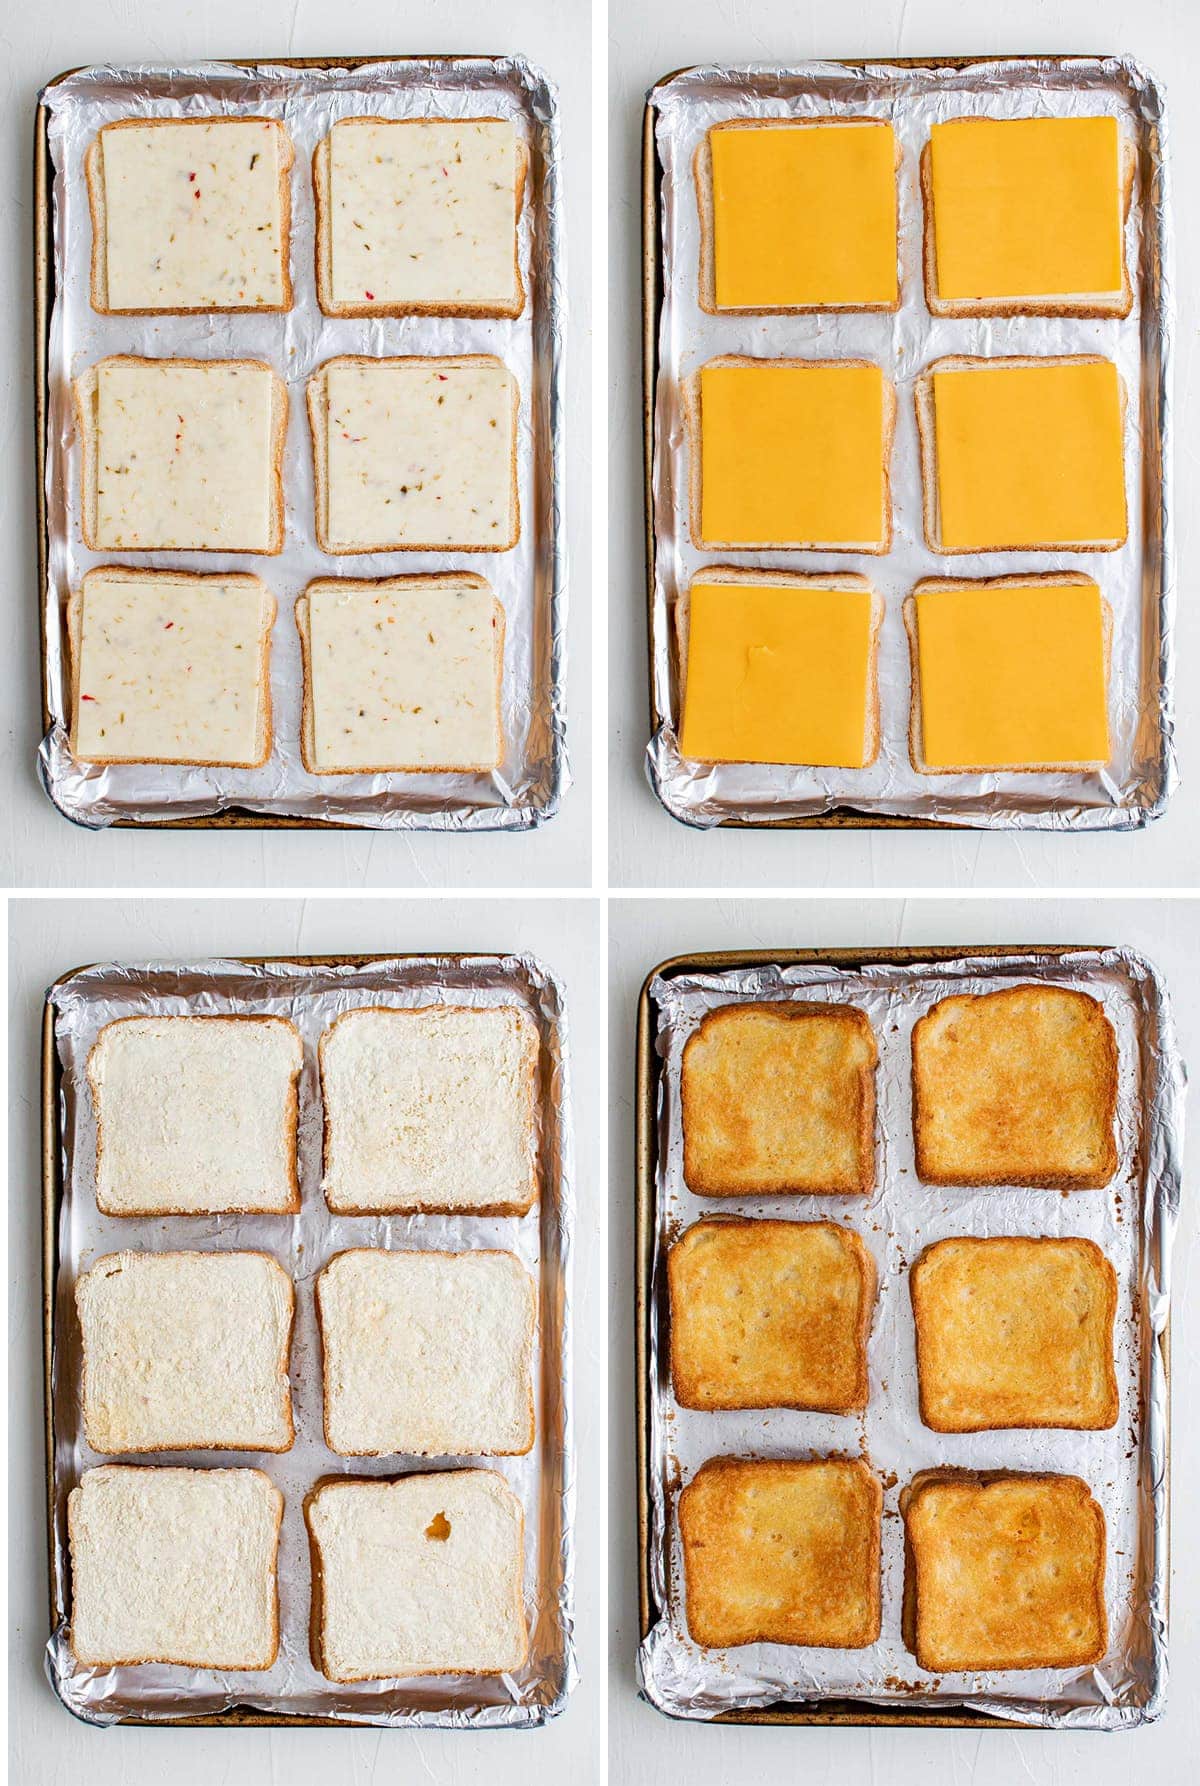 https://www.yellowblissroad.com/wp-content/uploads/2021/05/grilled-cheese-collage-1.jpg